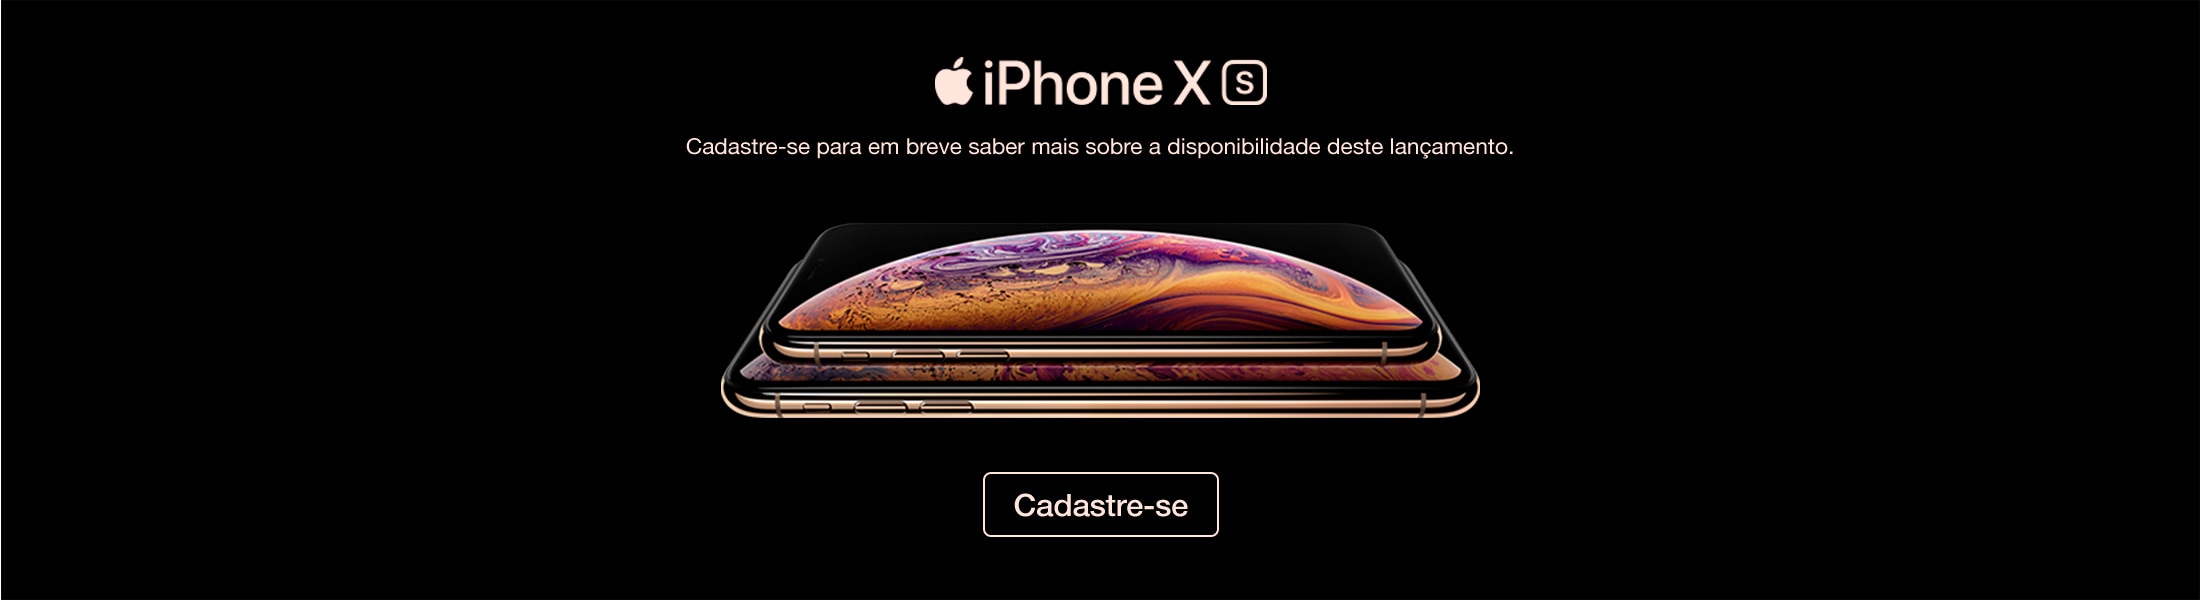 Banner iPhone XS